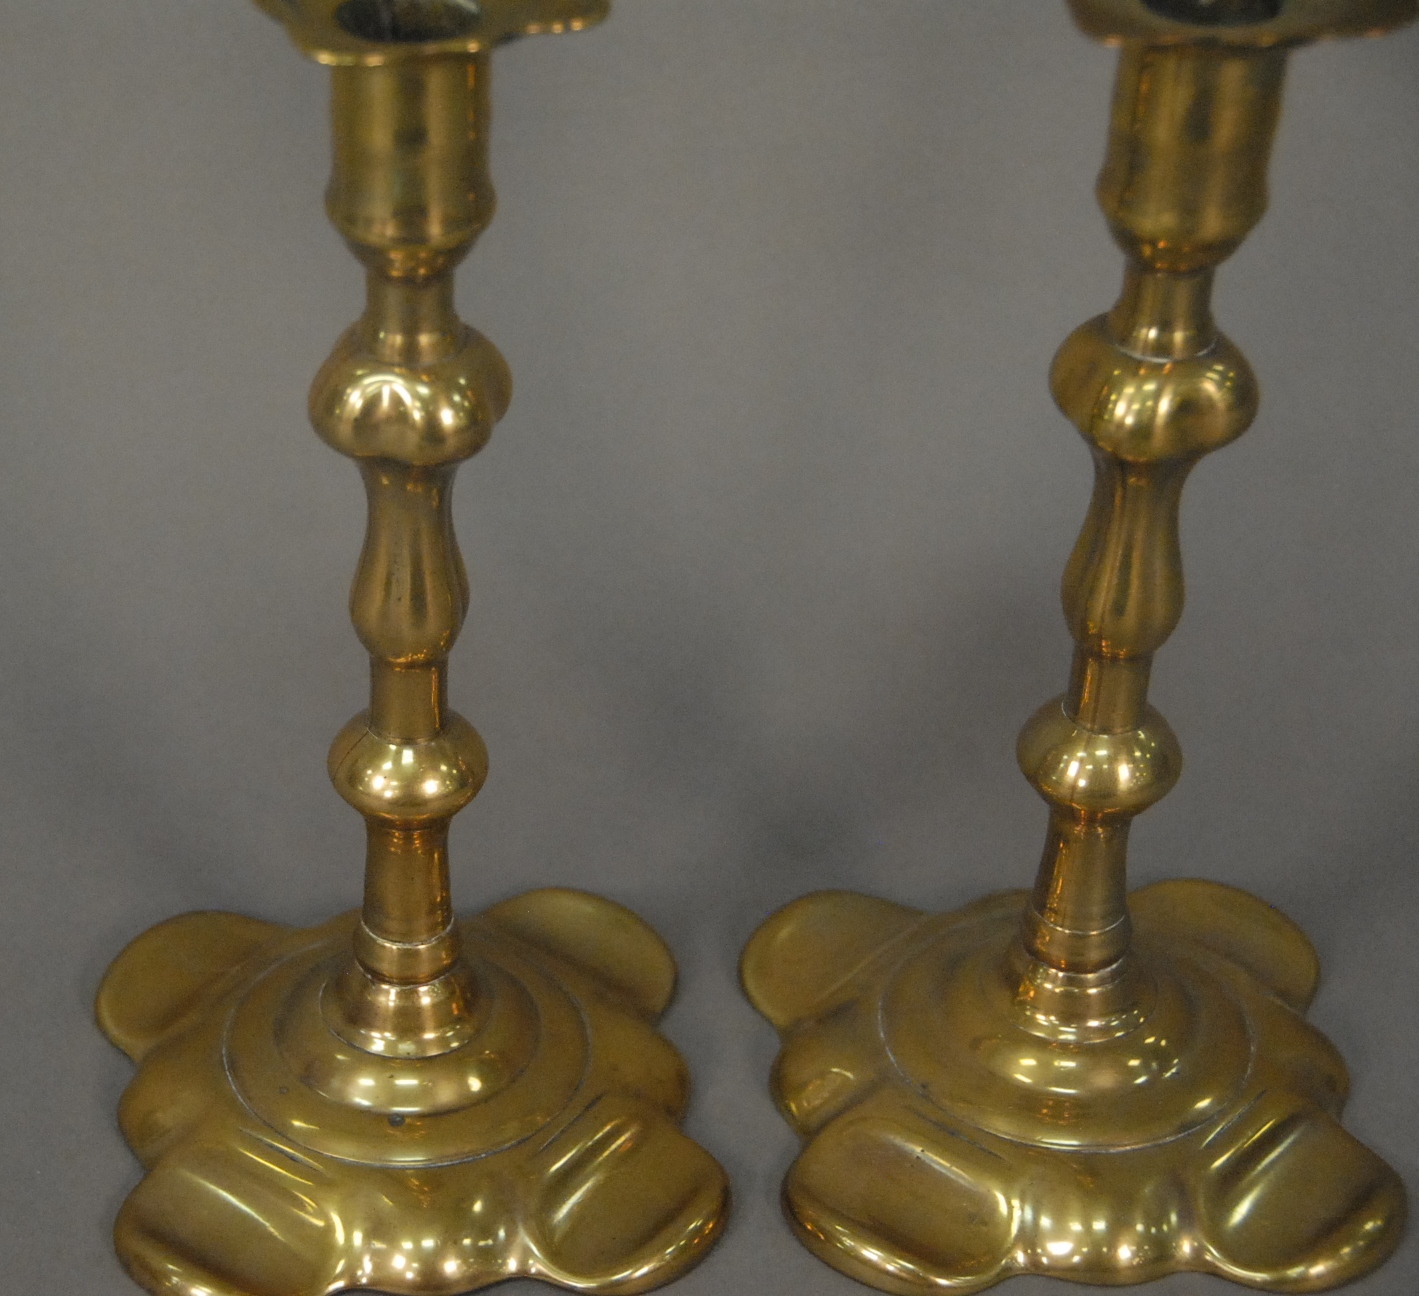 Lot 39D: Pair of George II brass candlesticks with petal bases